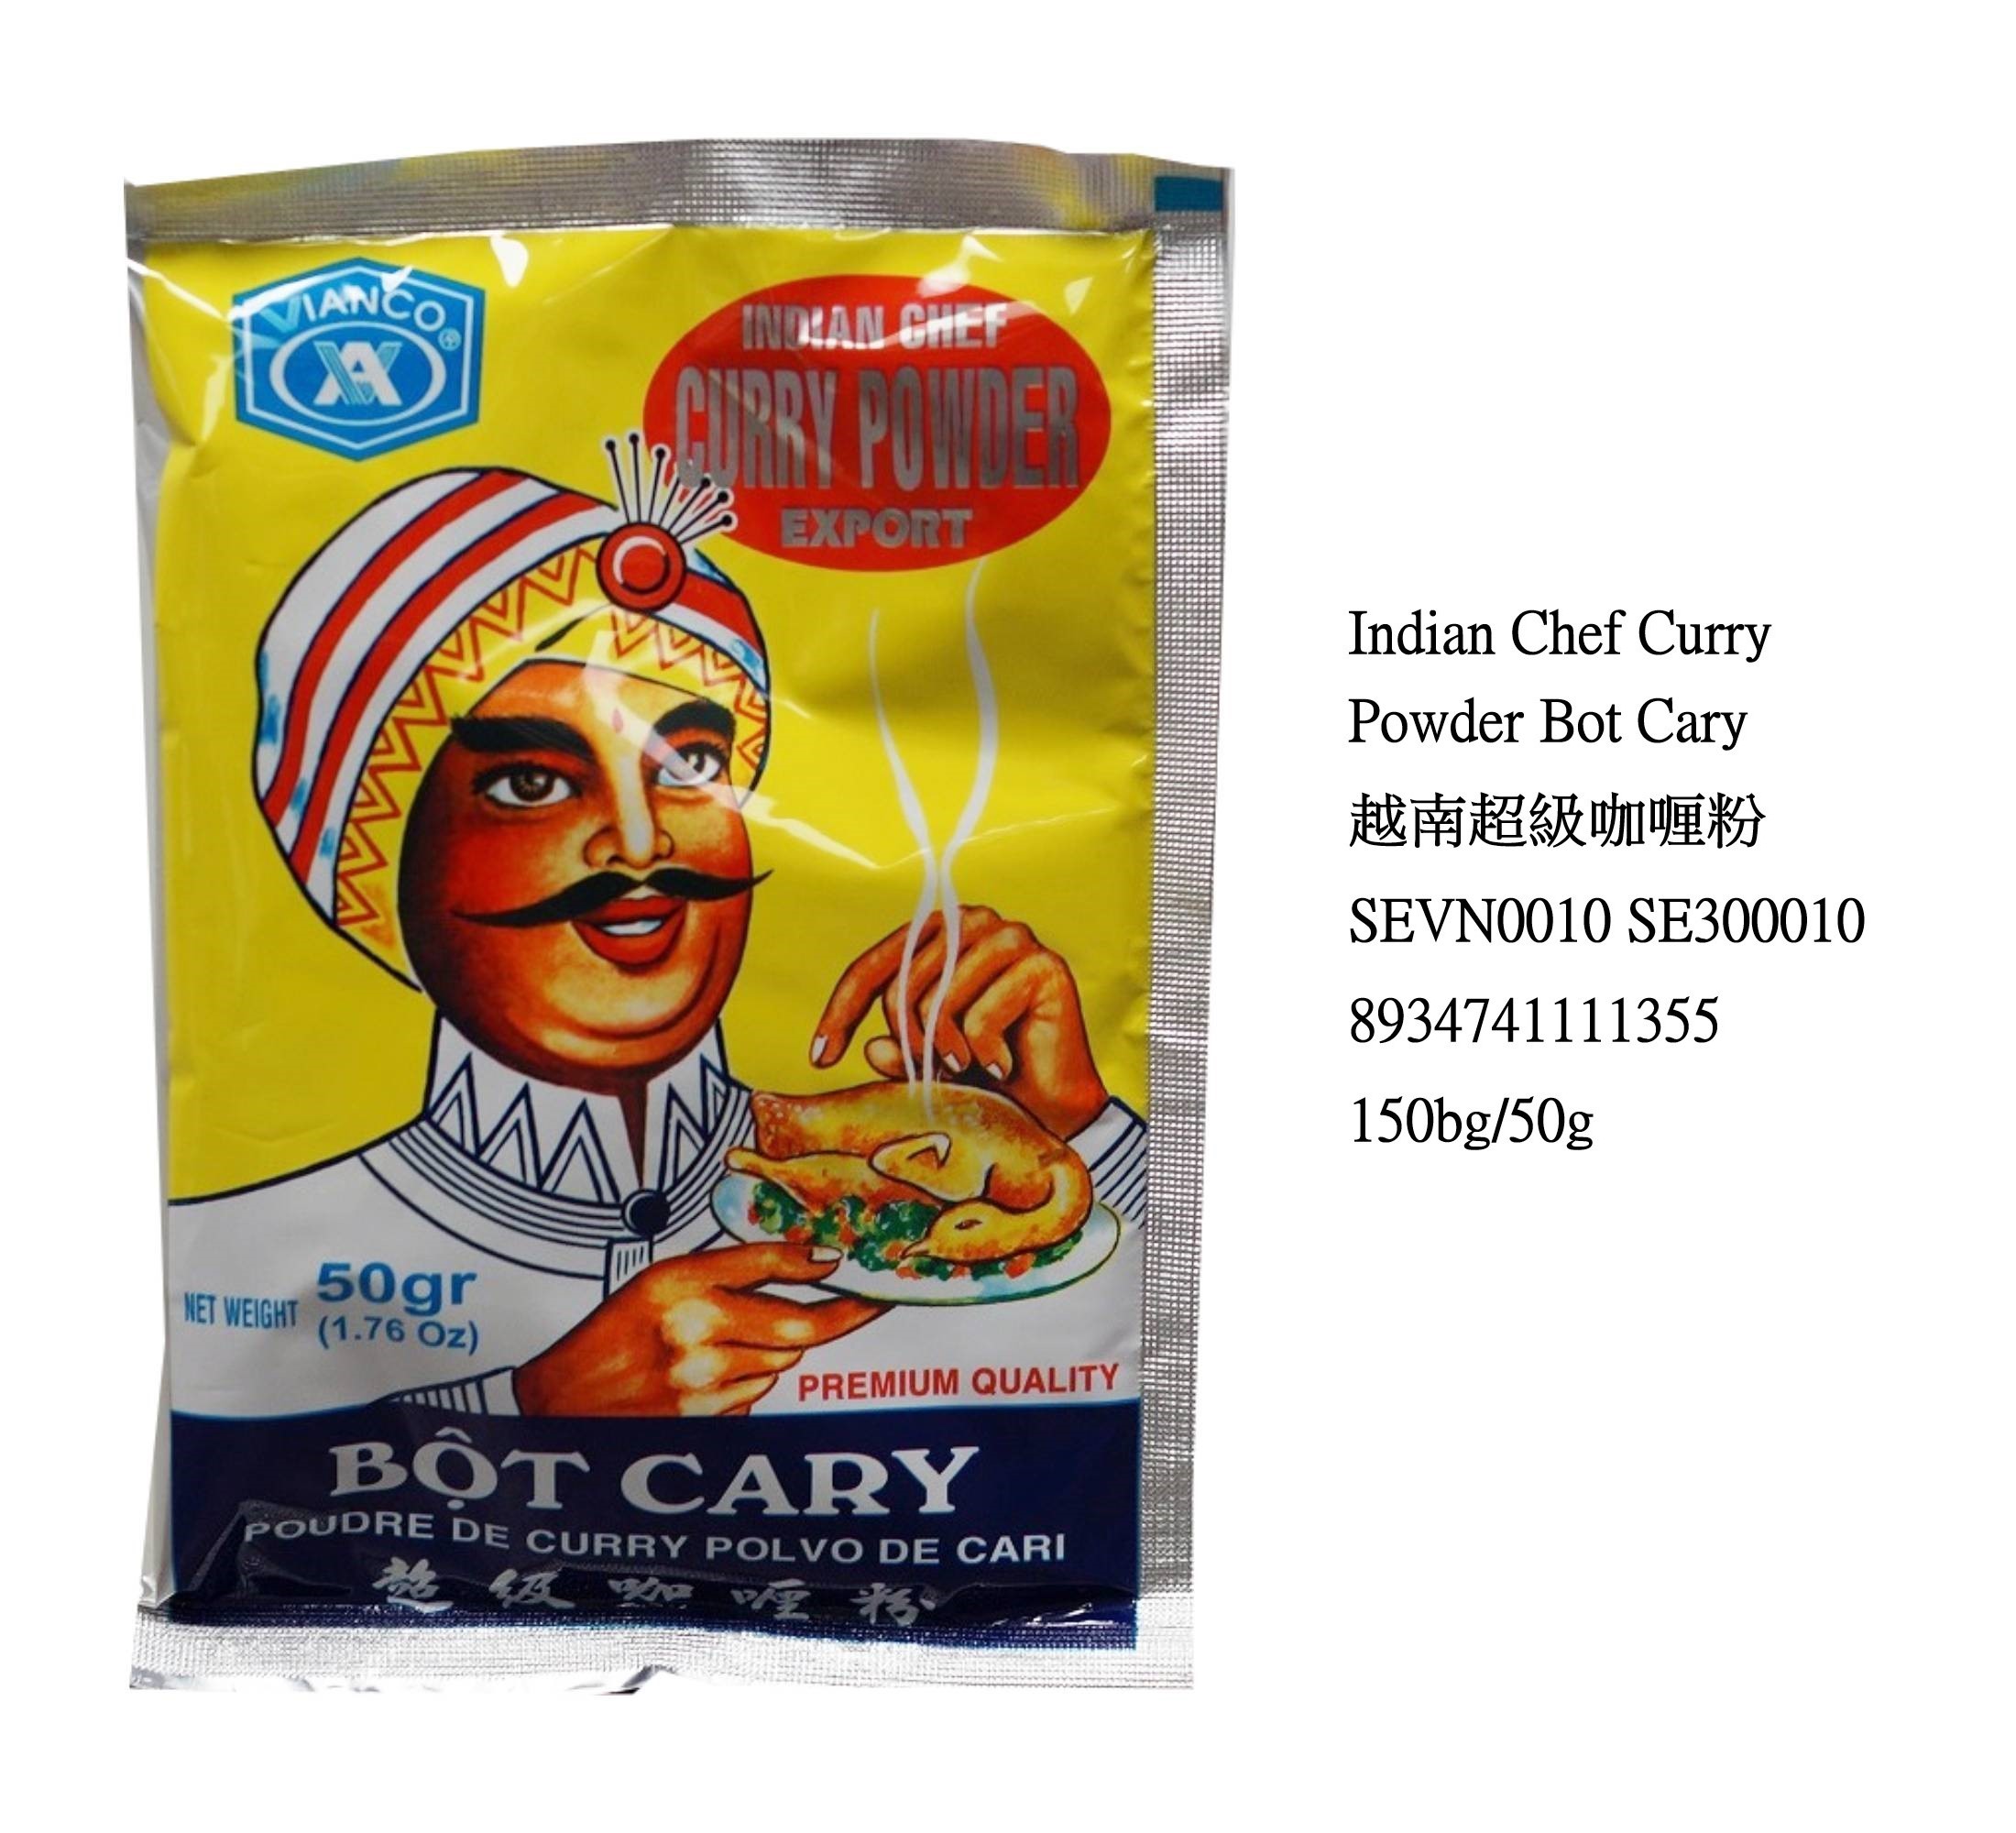 INDIAN CHEF CURRY POWDER BOT CARY SE300010